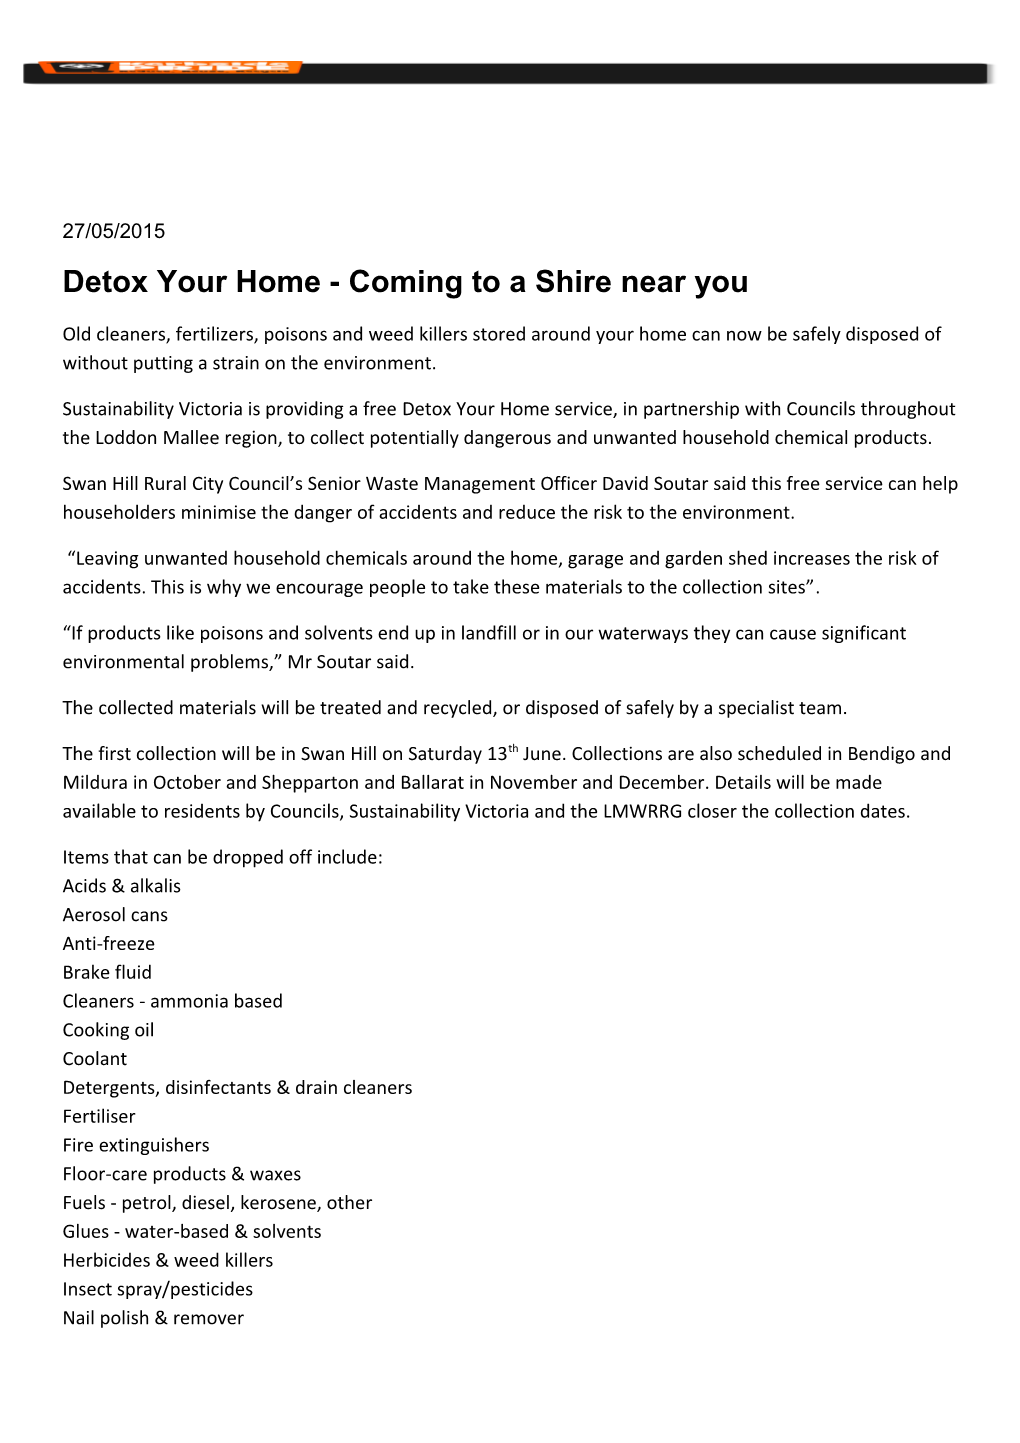 Detox Your Home - Coming to a Shire Nearyou